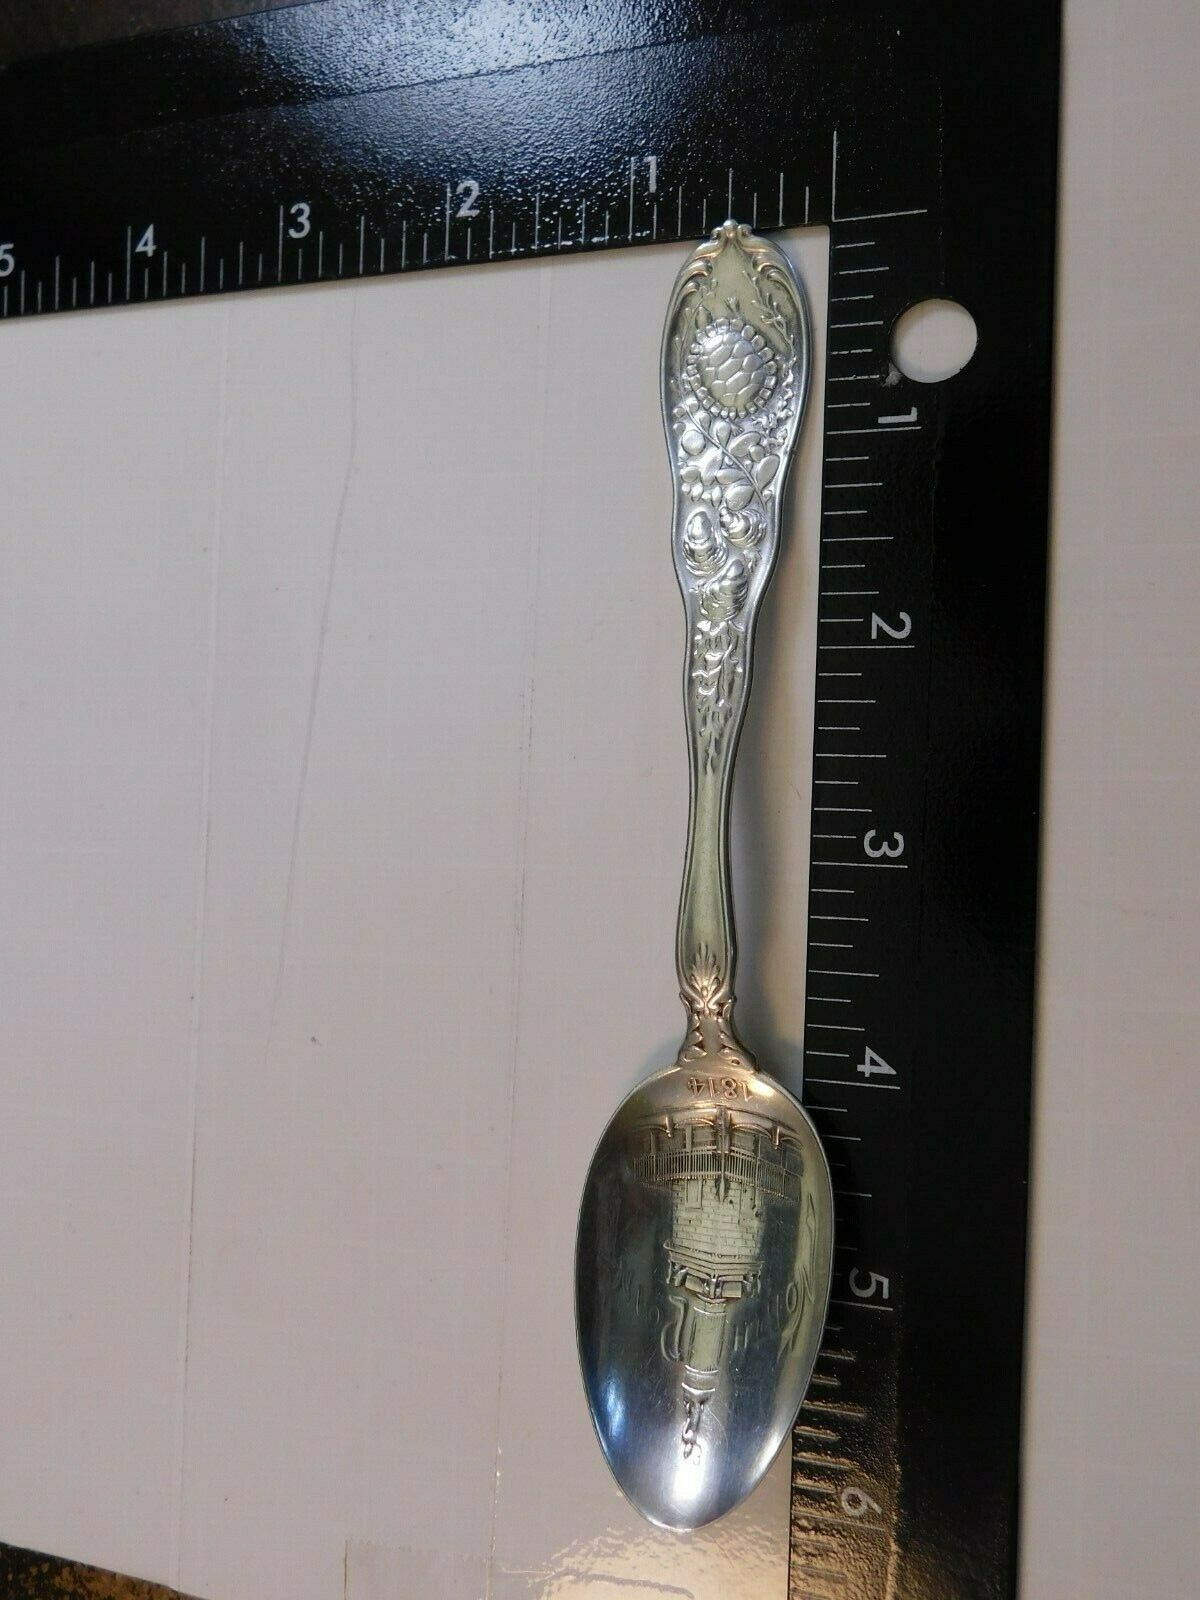 1814 NORTH POINT LIGHTHOUSE BALTIMORE MARYLAND 1891 STERLING SPOON